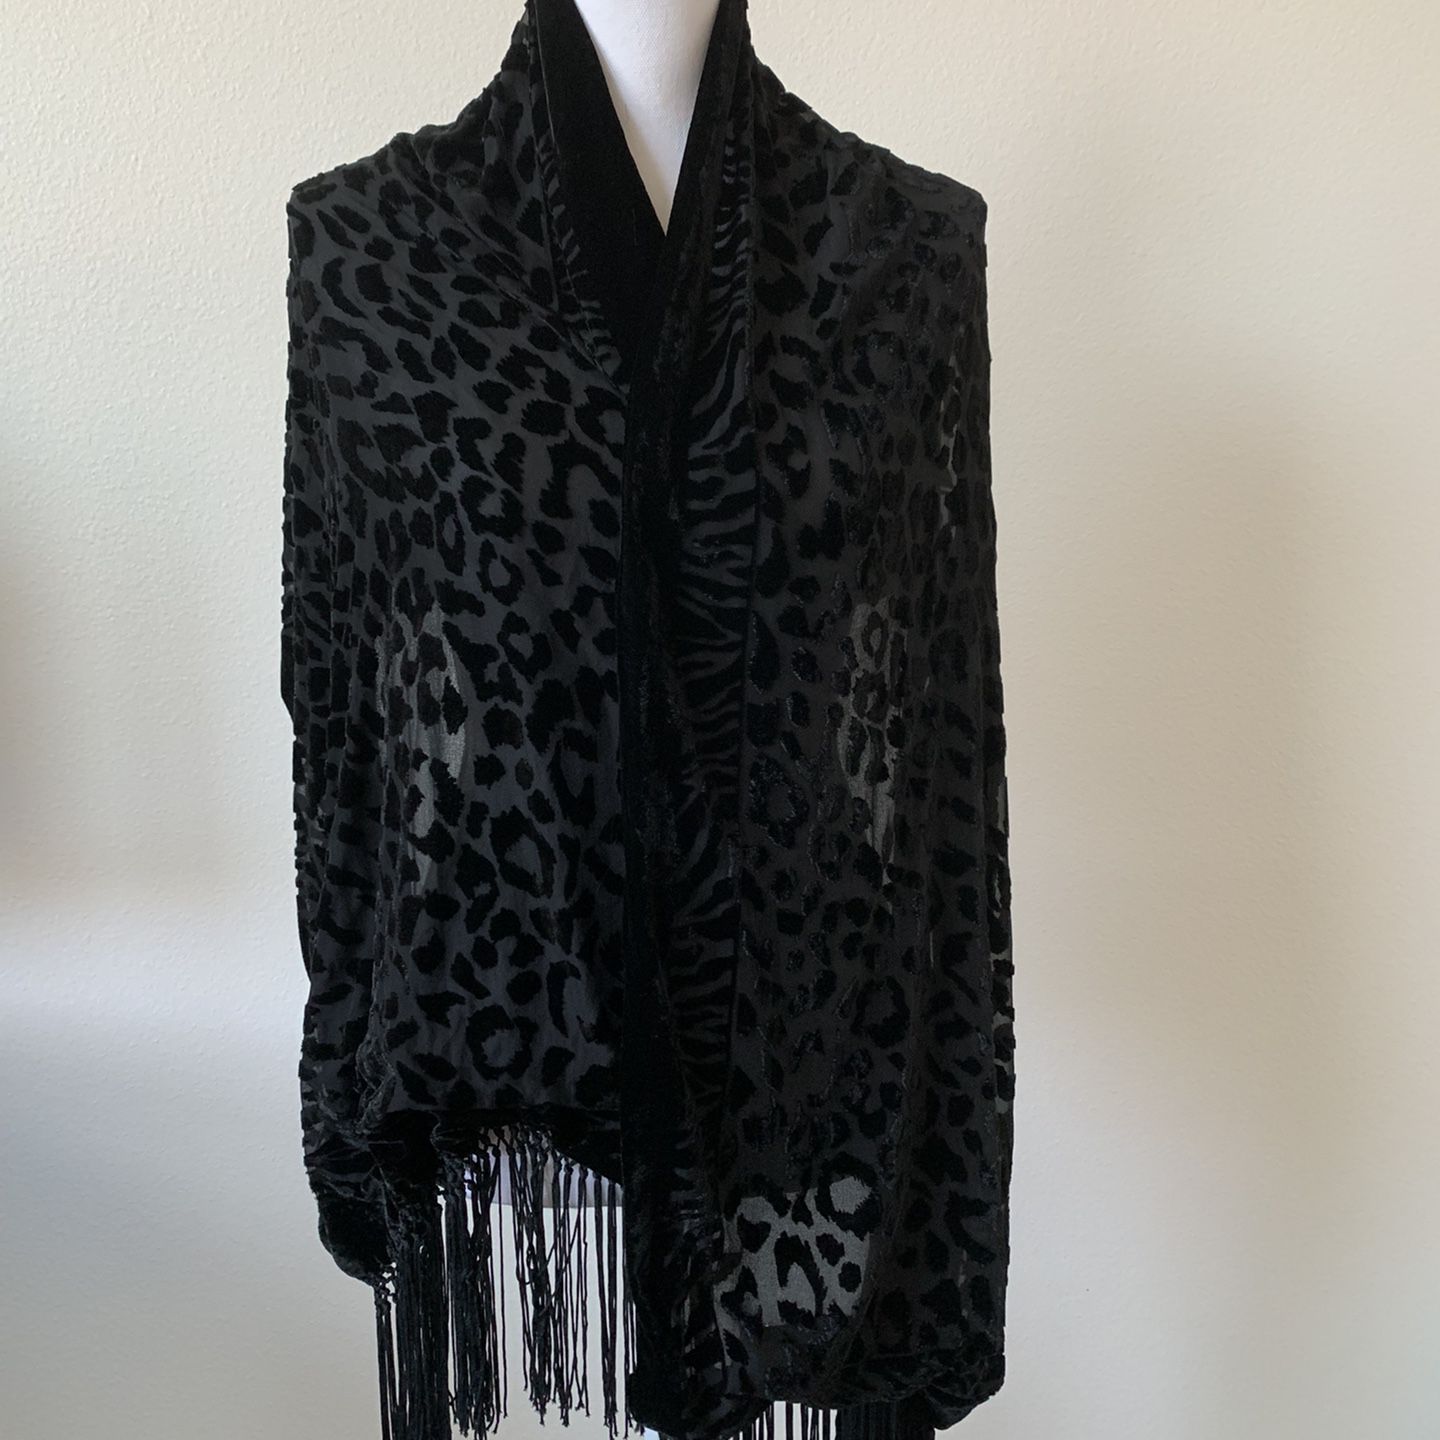 Vintage Chanel Scarf for Sale in Monrovia, CA - OfferUp